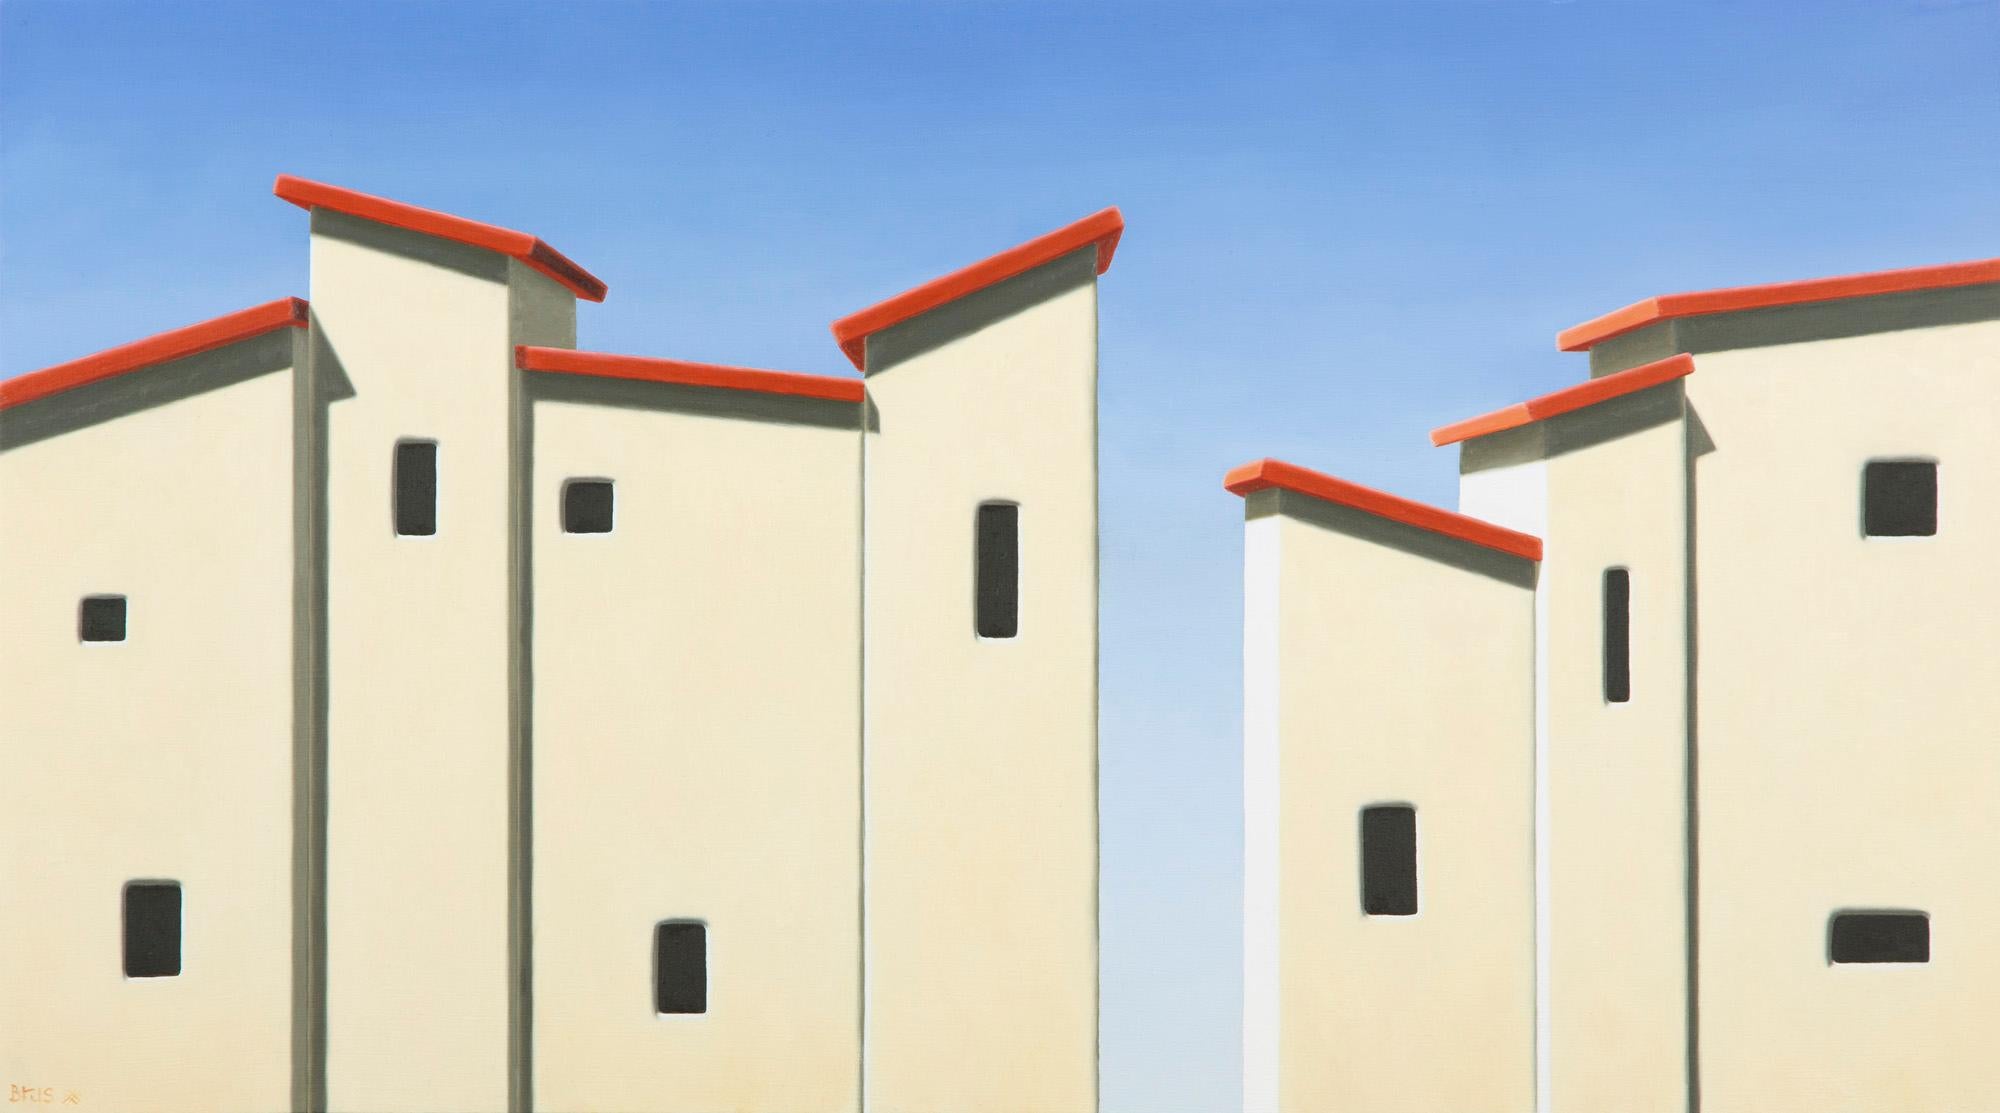 Bert Brus Figurative Painting - Red Roofs III - 21st Century Contemporary Oil Painting of Rooftops with Blue Sky